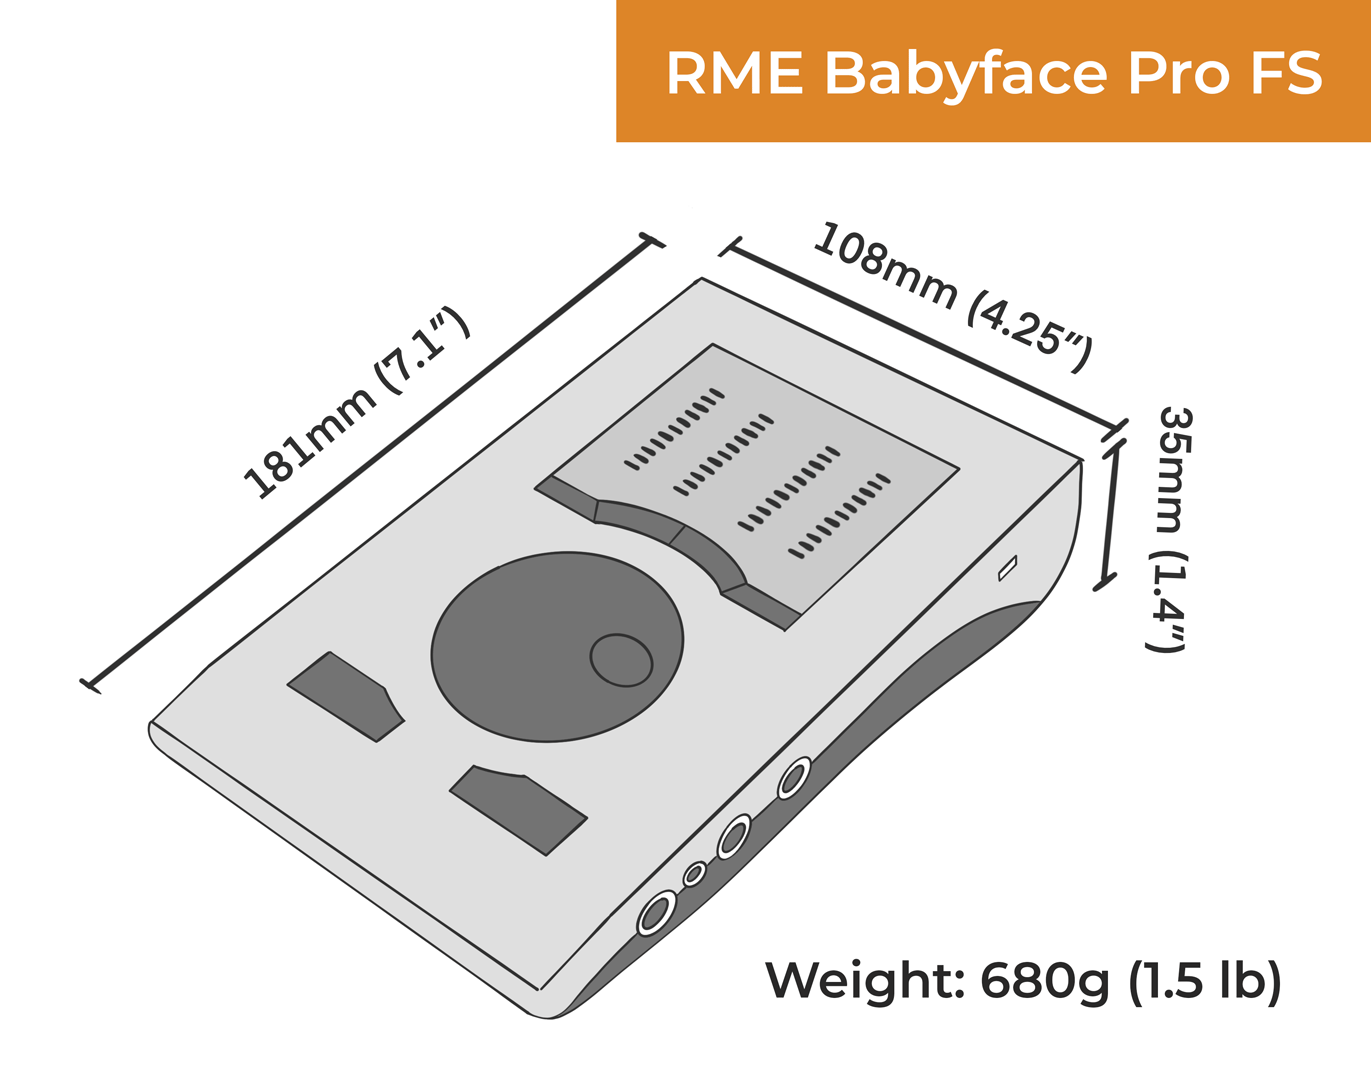 Dimensions and weight of the RME Babyface Pro FS